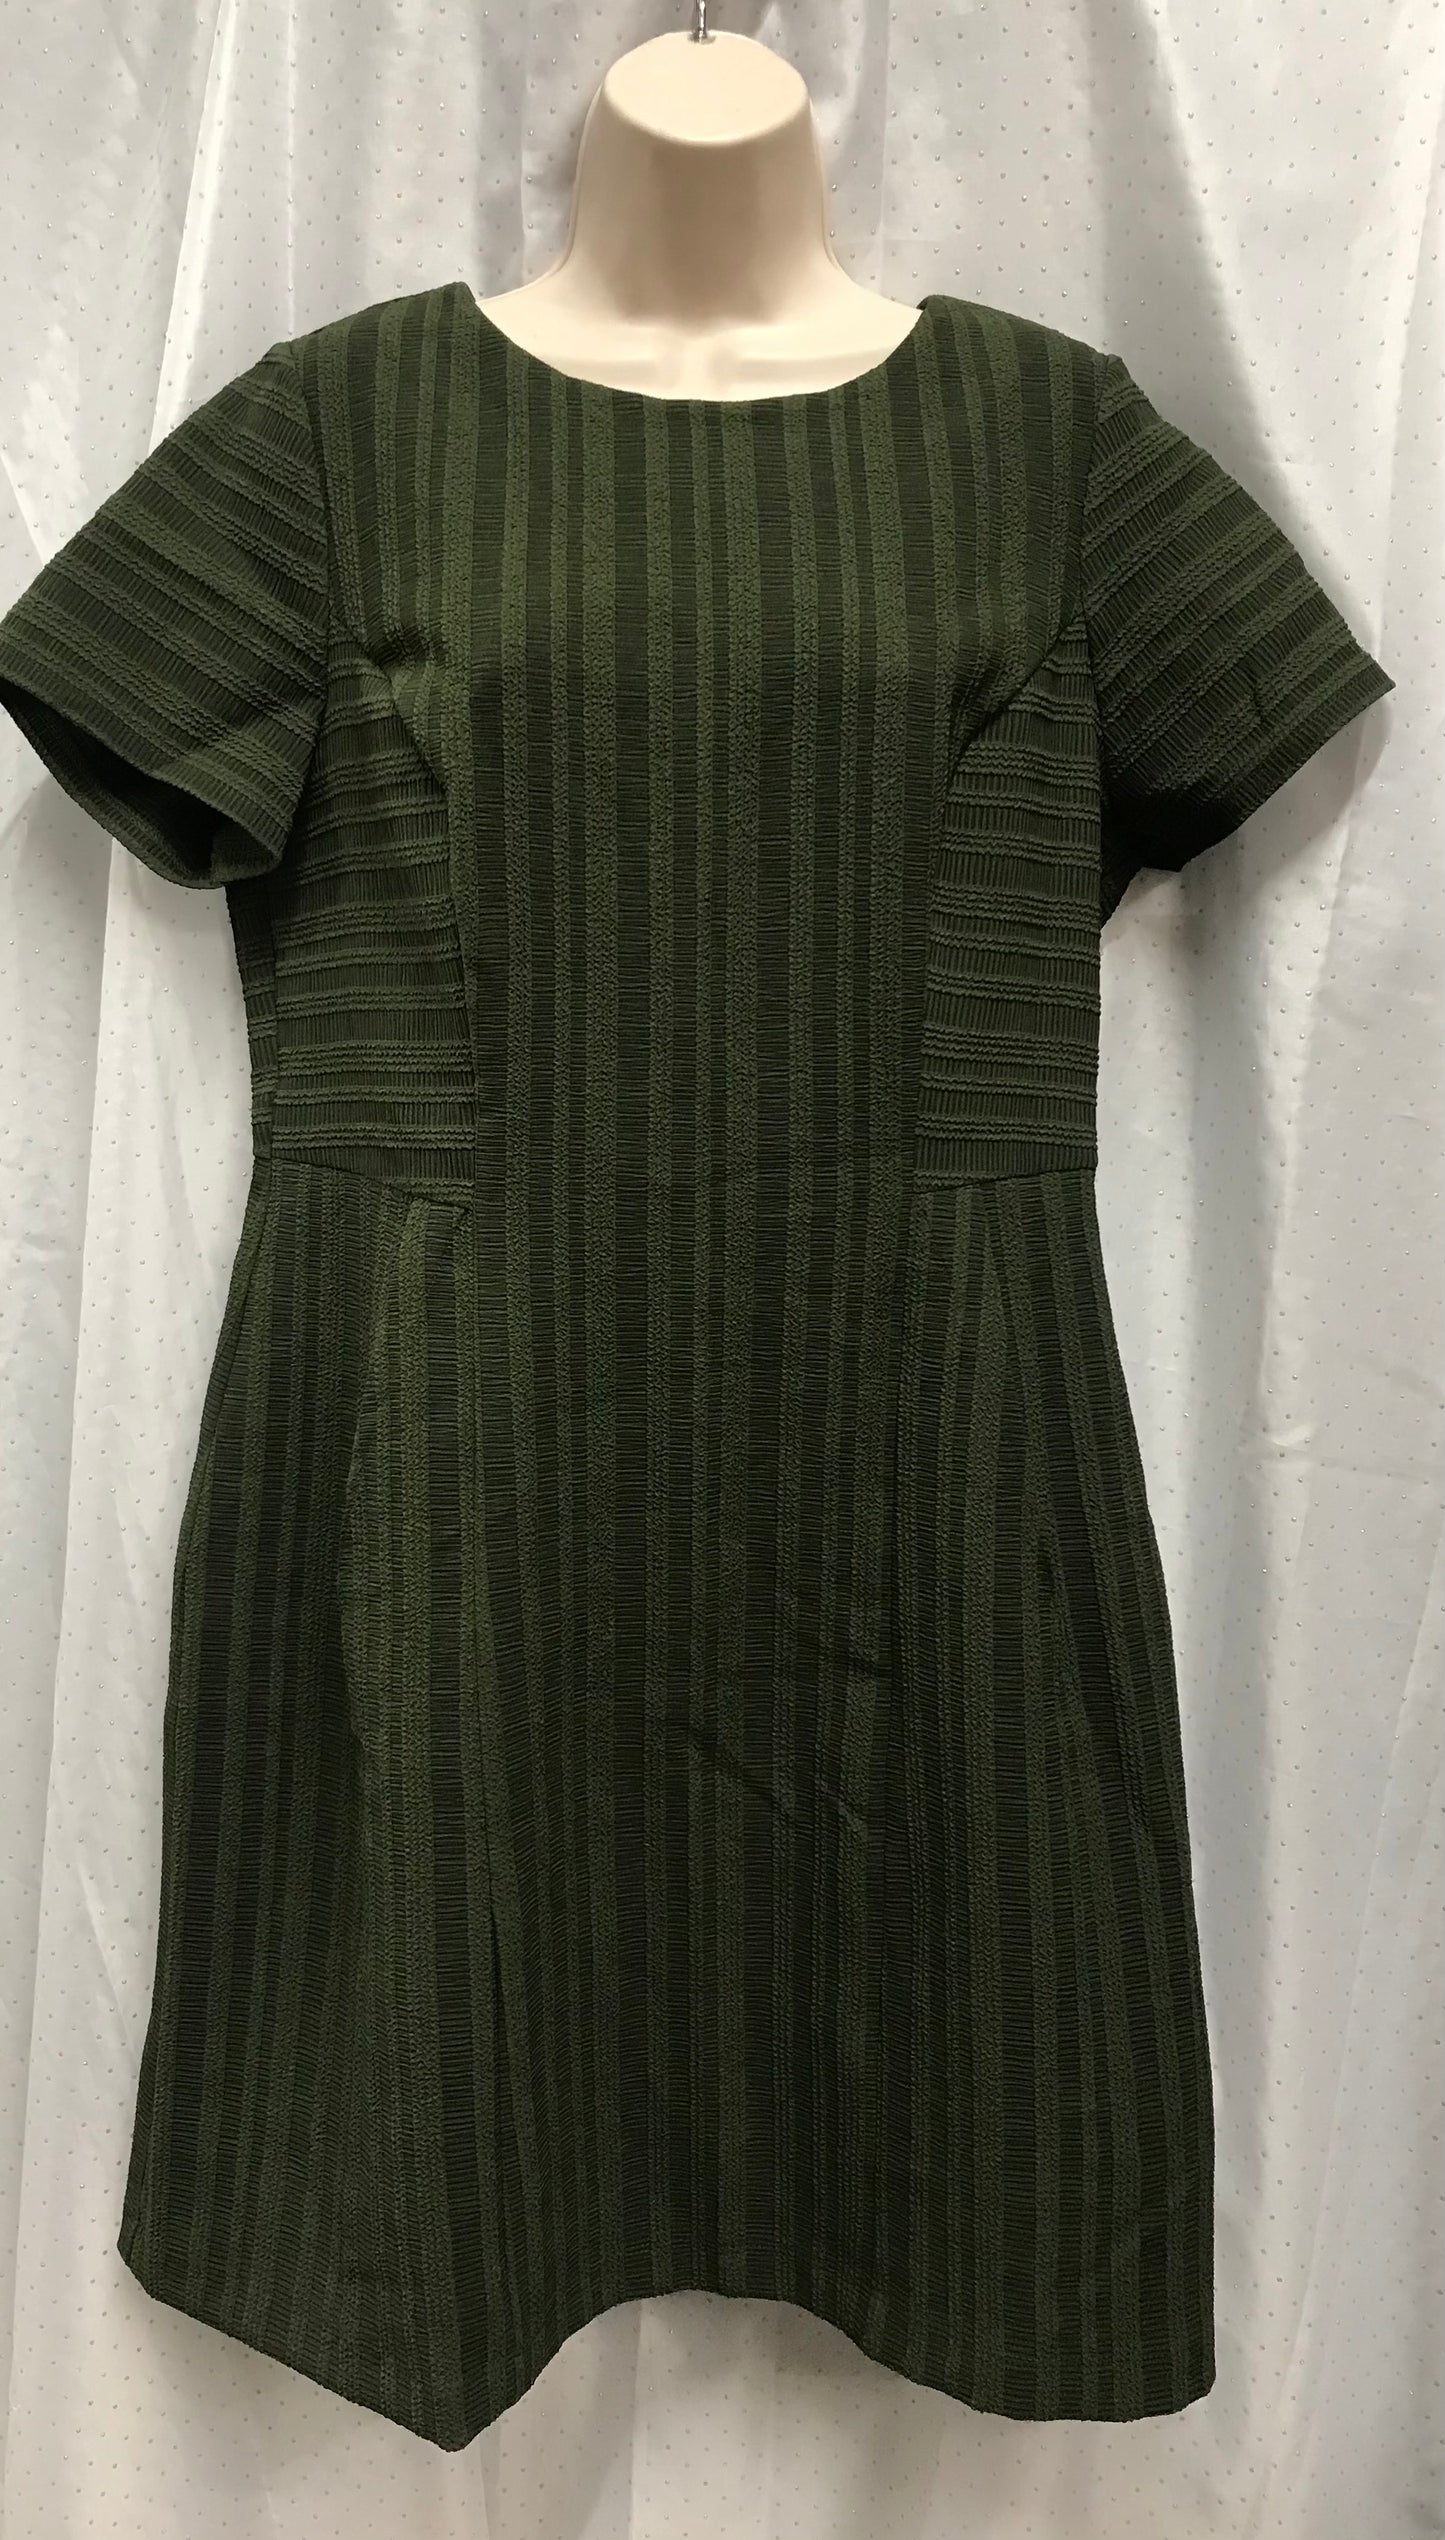 Marks and Spencer Limited Edition Deep Green Size 14 Short Sleeved MIDI Dress with Zipped Fastening BNWT